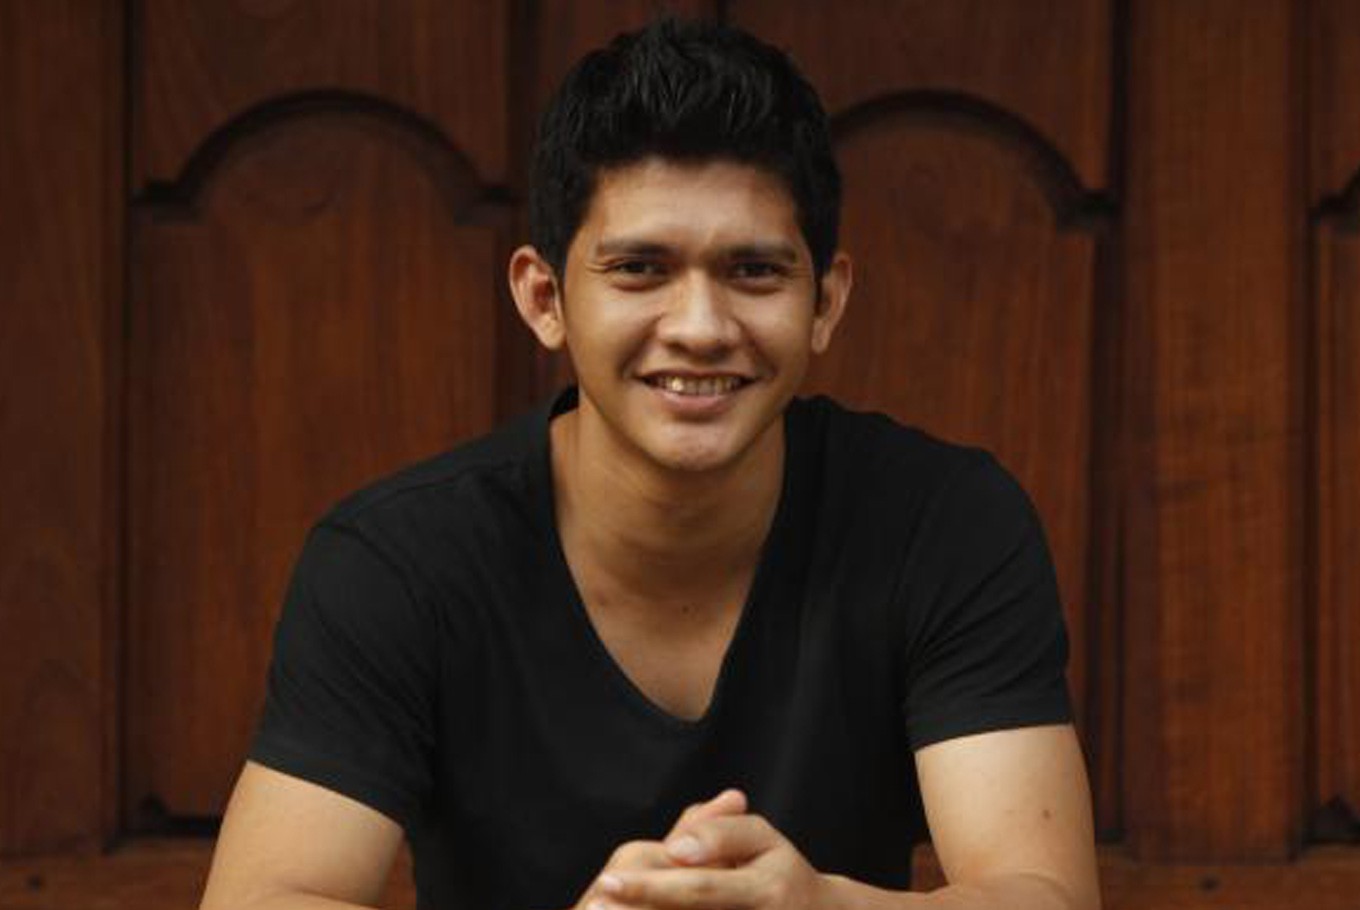 Snake Eyes: Iko Uwais In Talks To Join Cast For G.I Joe Spinoff